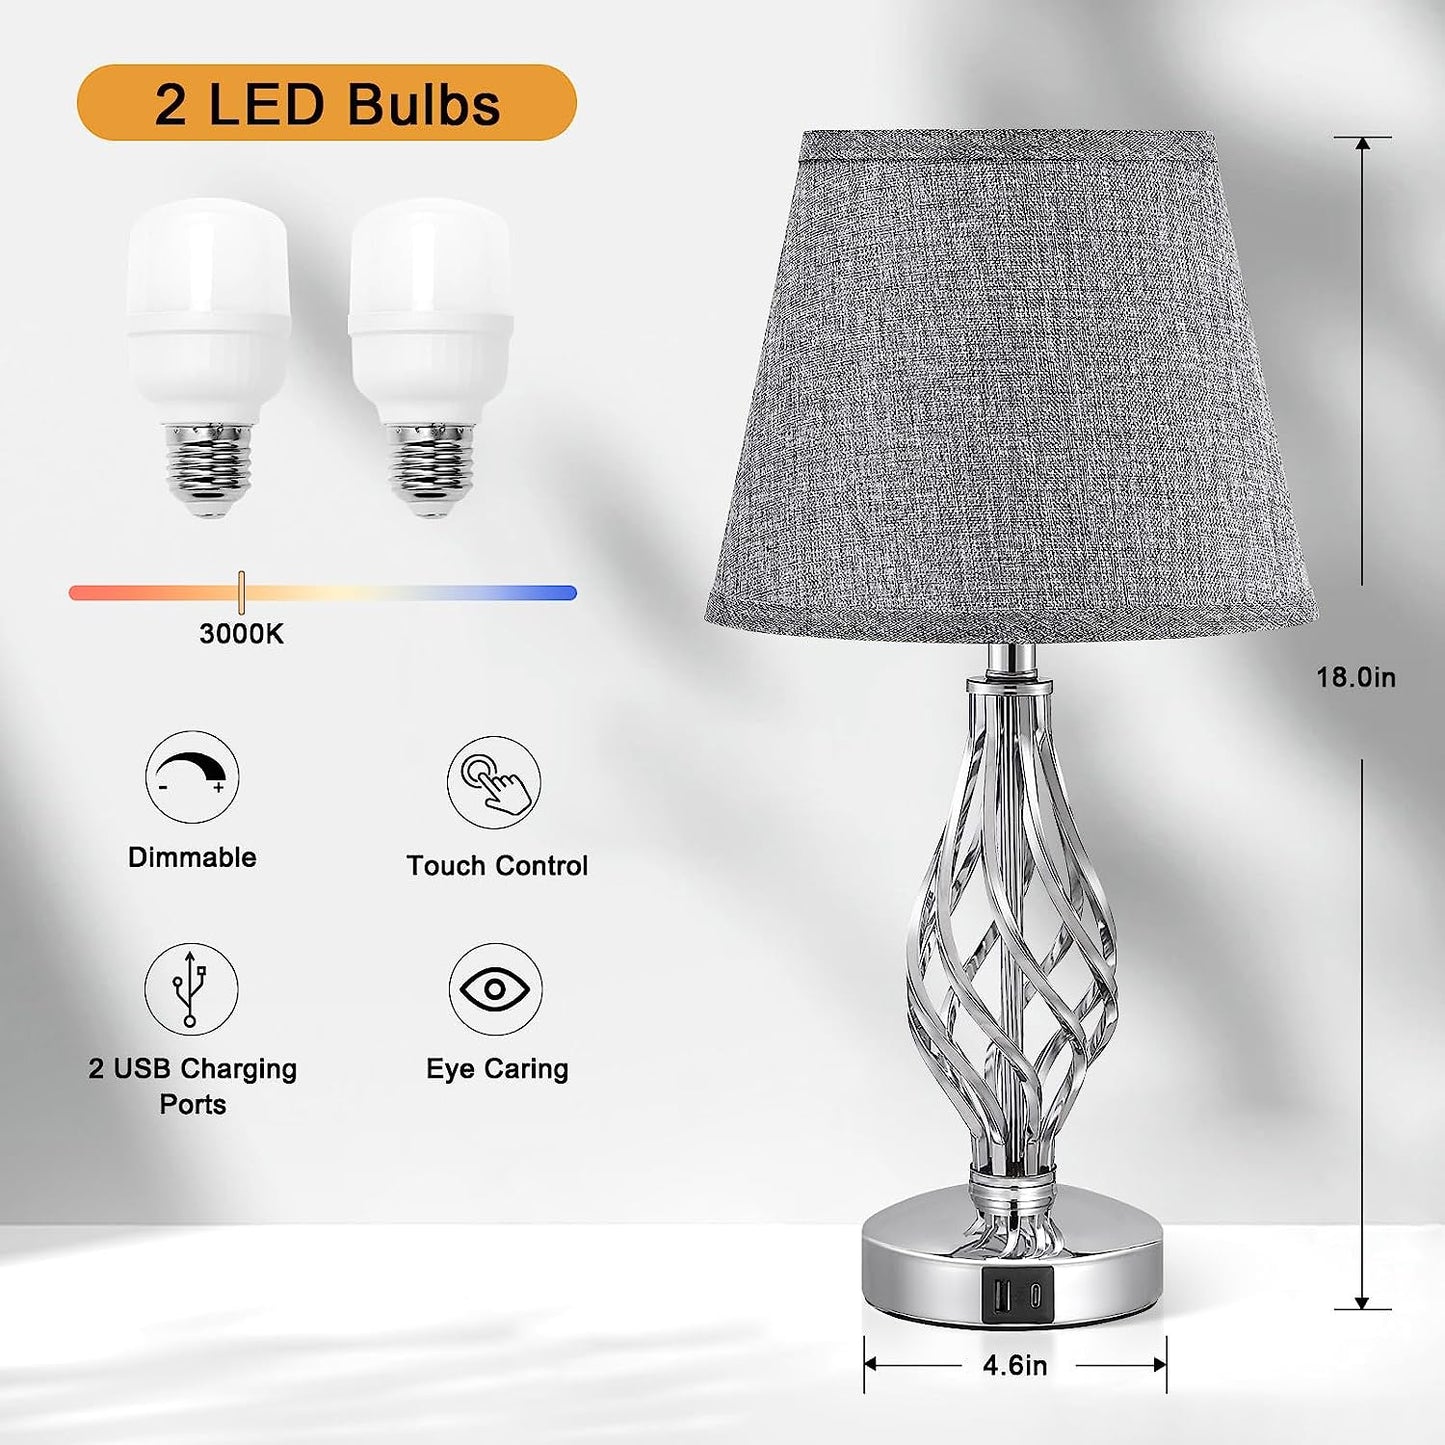 Touch Table Lamps Set of 2, with USB Ports, Bedside Lamps with Spiral Cage Base Design